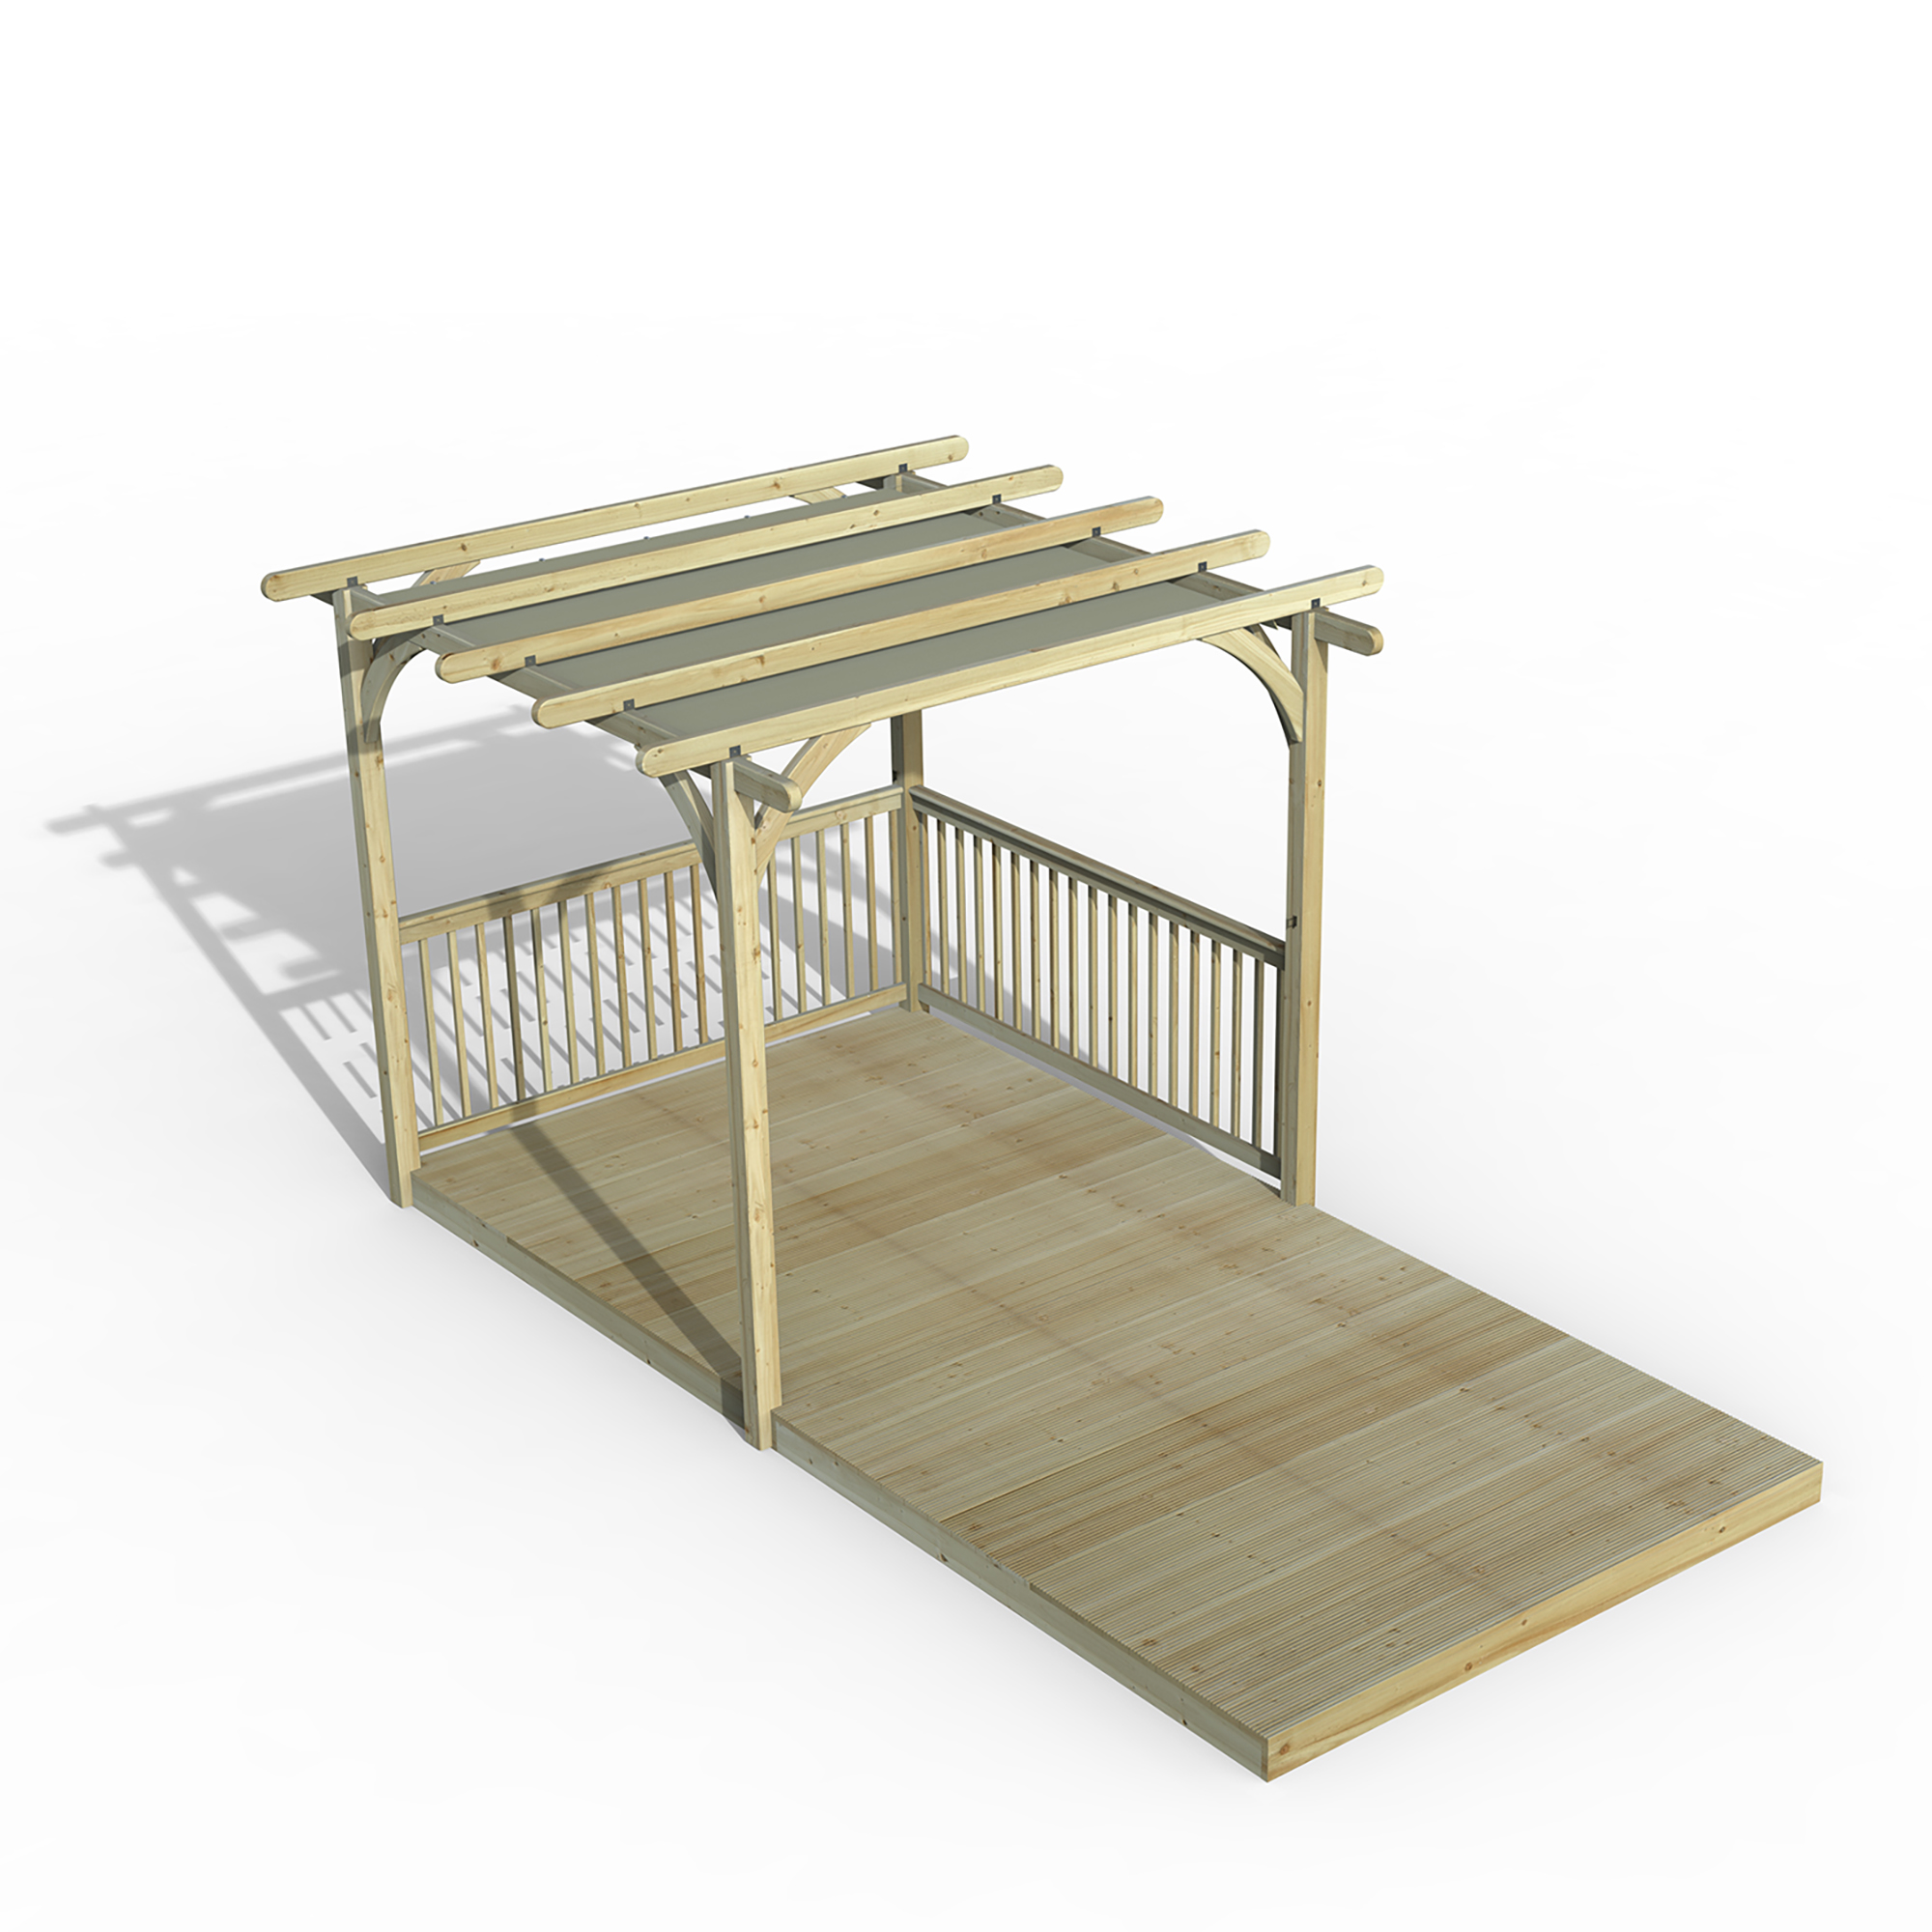 Forest Garden 2.4 x 4.8m Ultima Pergola and Decking Kit with 2 x Balustrade and Canopy